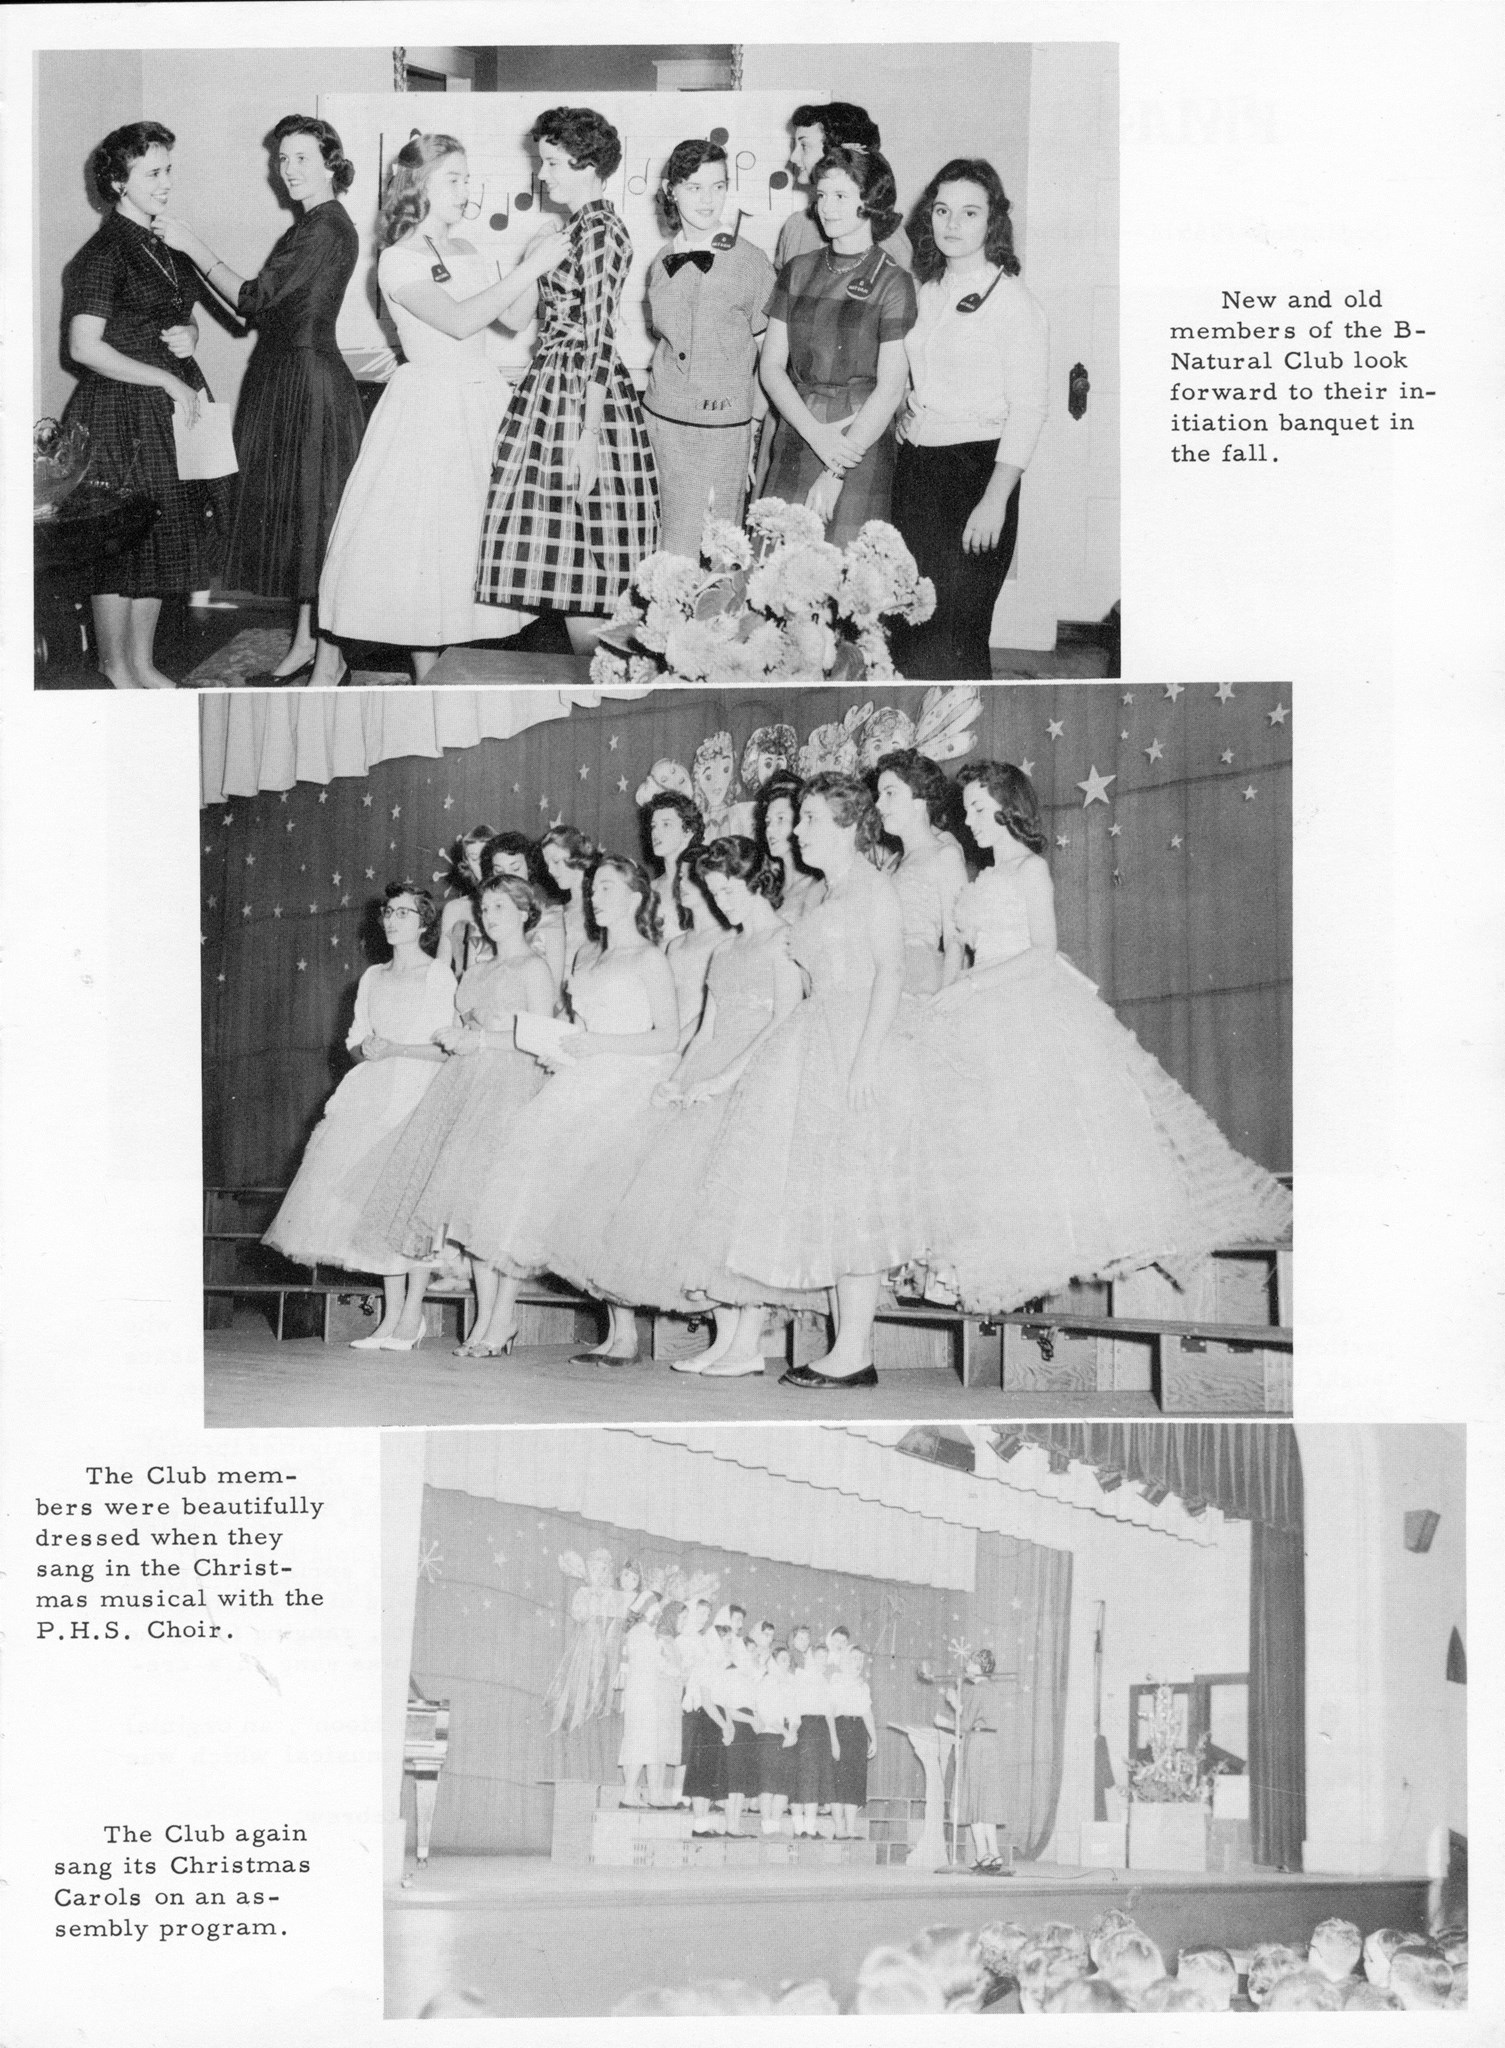 ../../../Images/Large/1959/Arclight-1959-pg0089.jpg